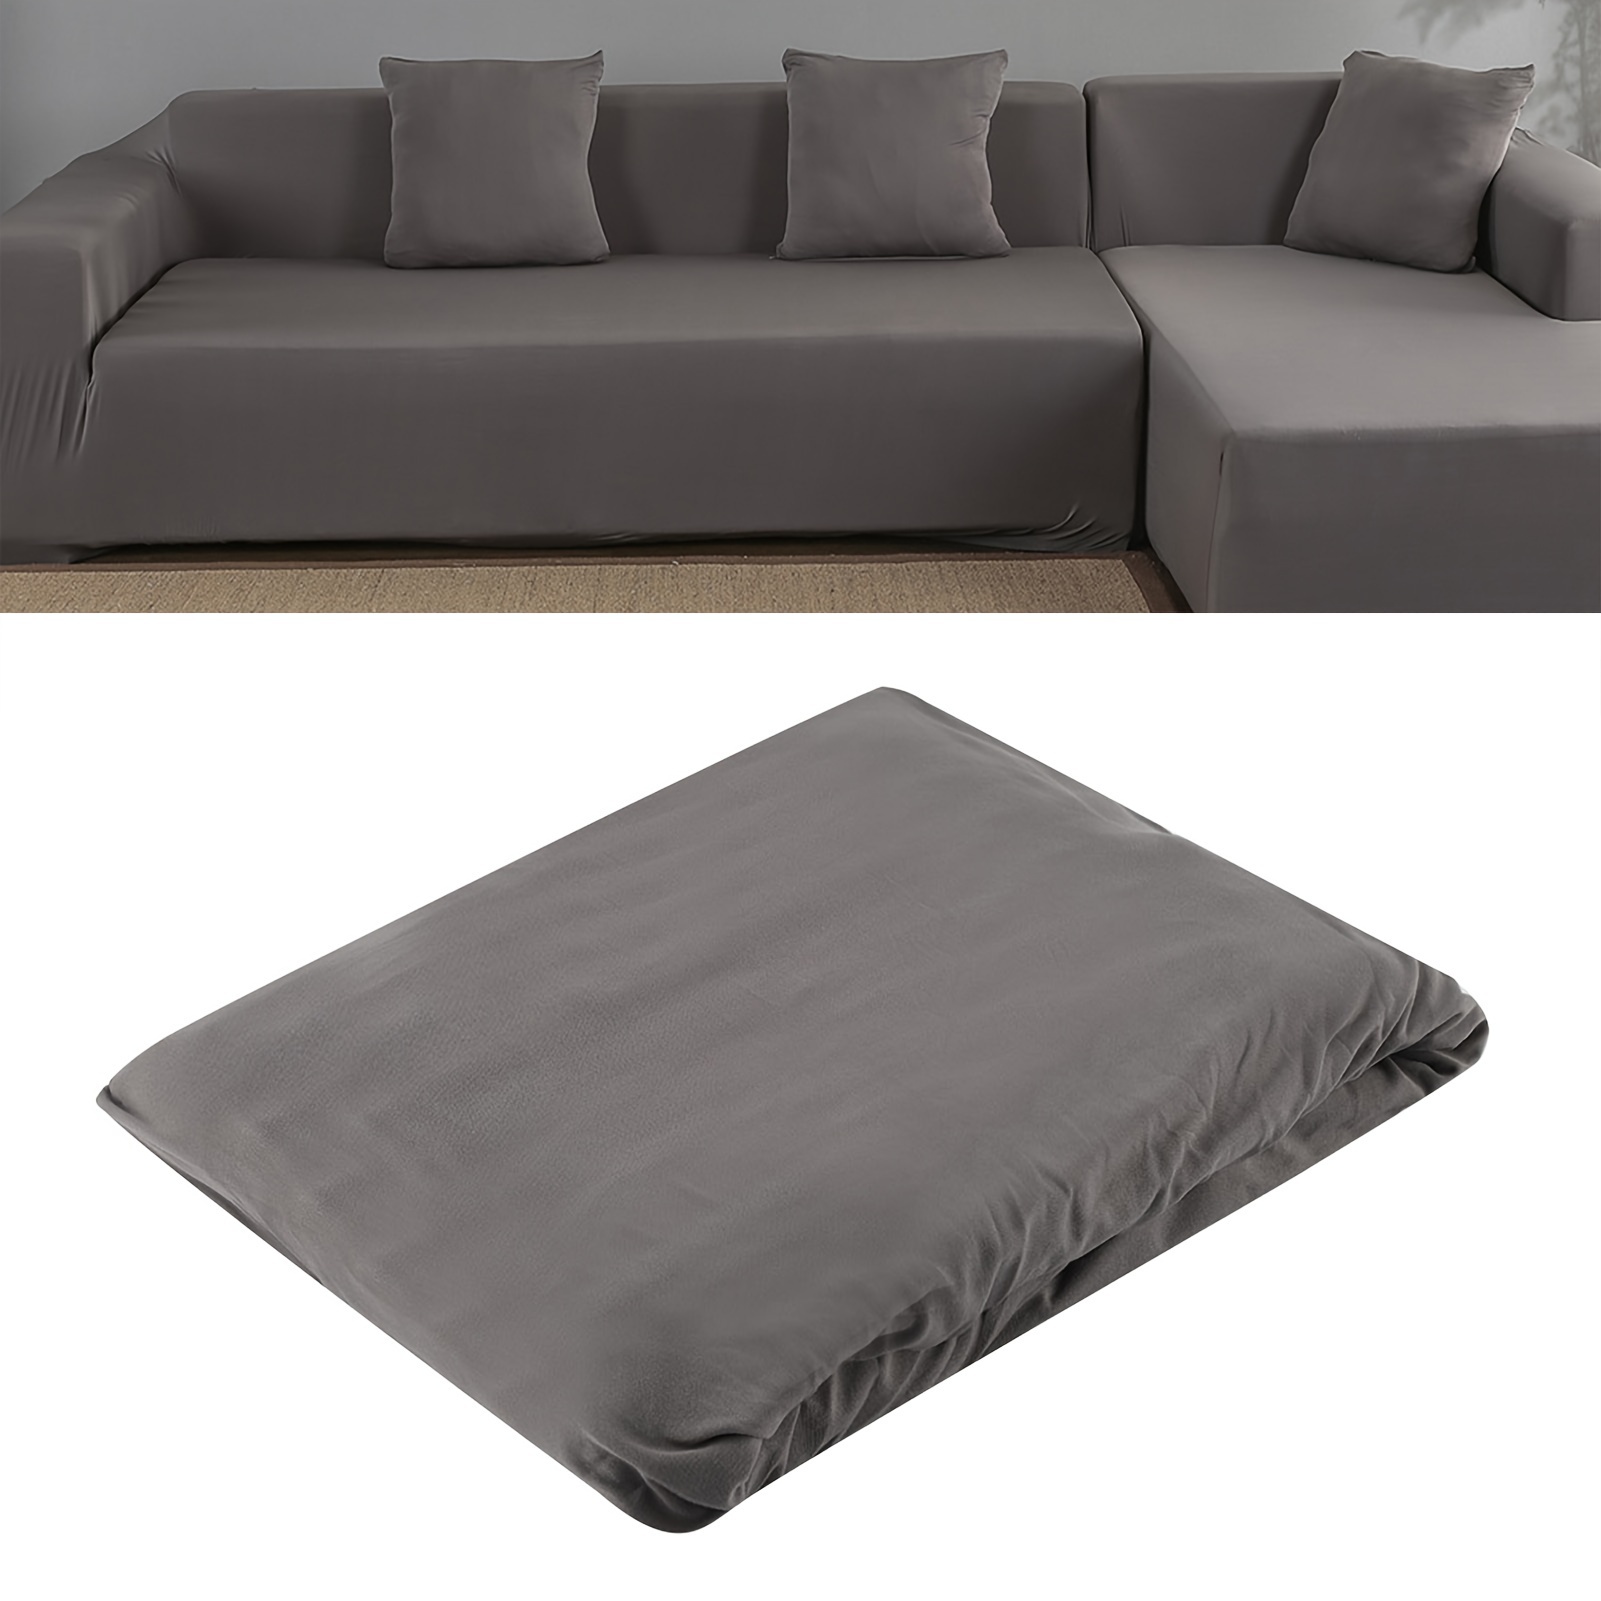 

3+2 Seat Sofa Cover, Polyester Stretch Sofa Slipcover L Shape Sofa Couch Cover 3+2 Seat Corner Sofa Cover Living Room Anti Slip Dogs Pets Home Furniture Protector, 3+2 Seats (gray)